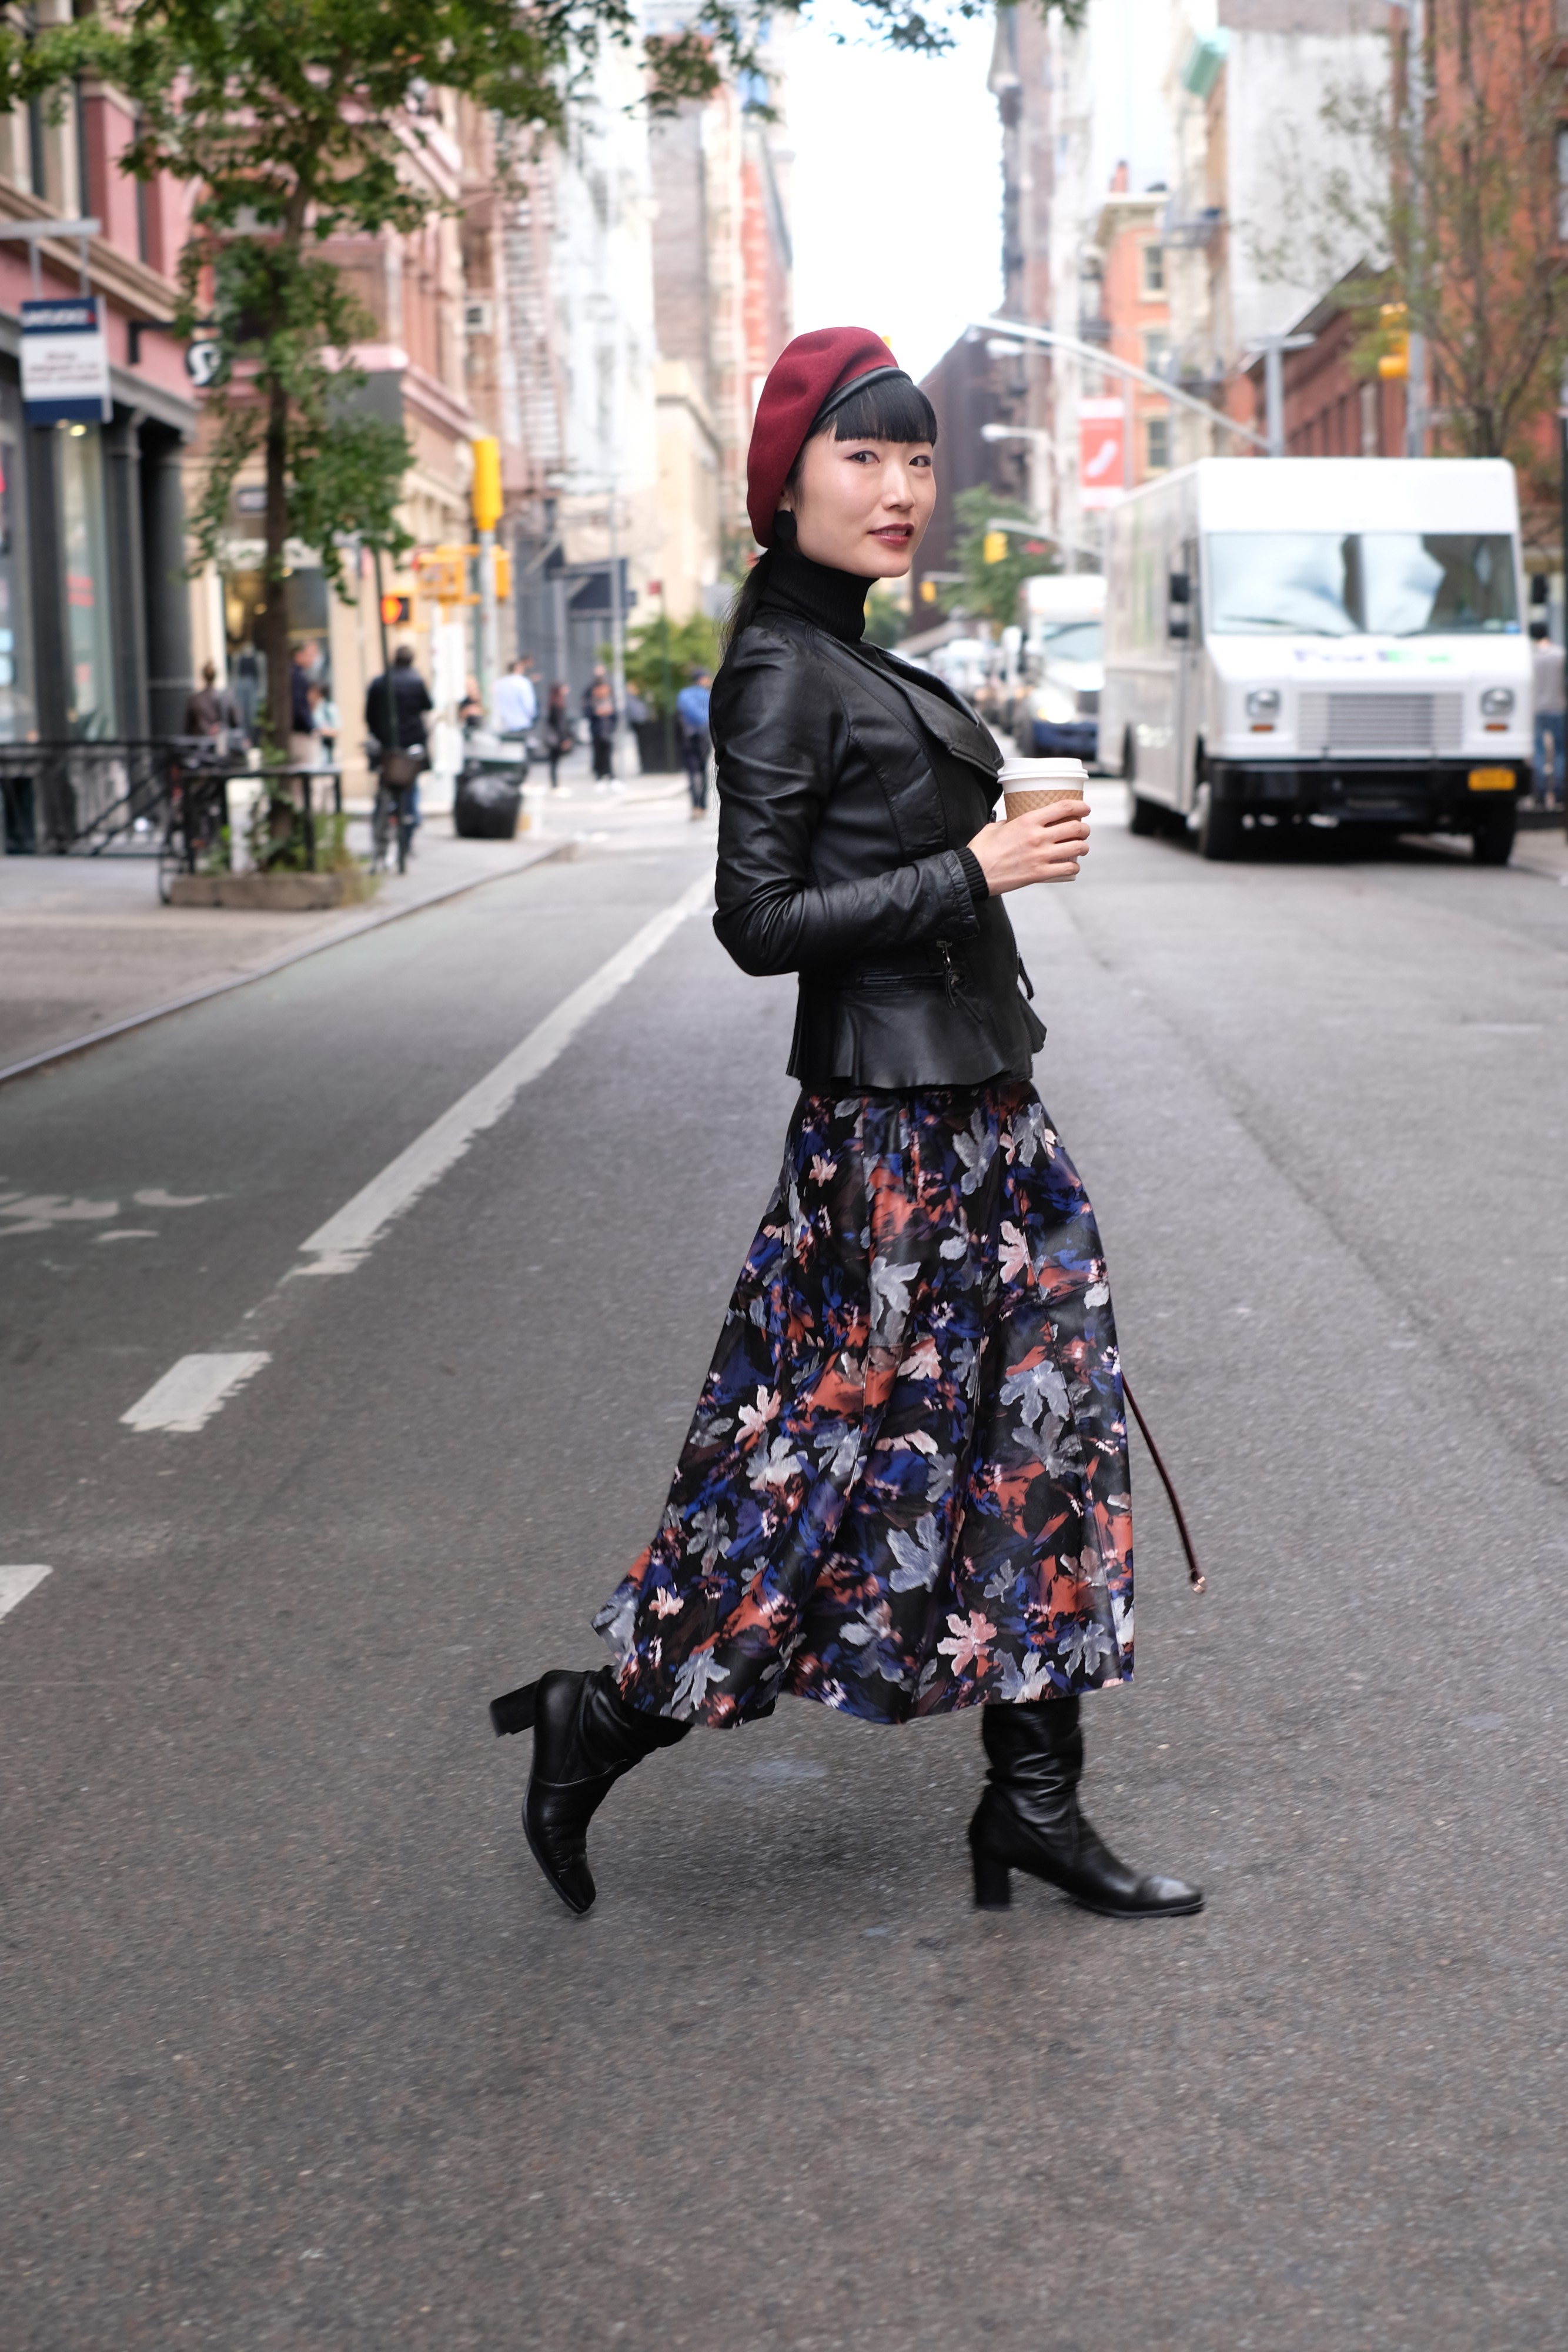 Asian girl in floral dress and black jacket